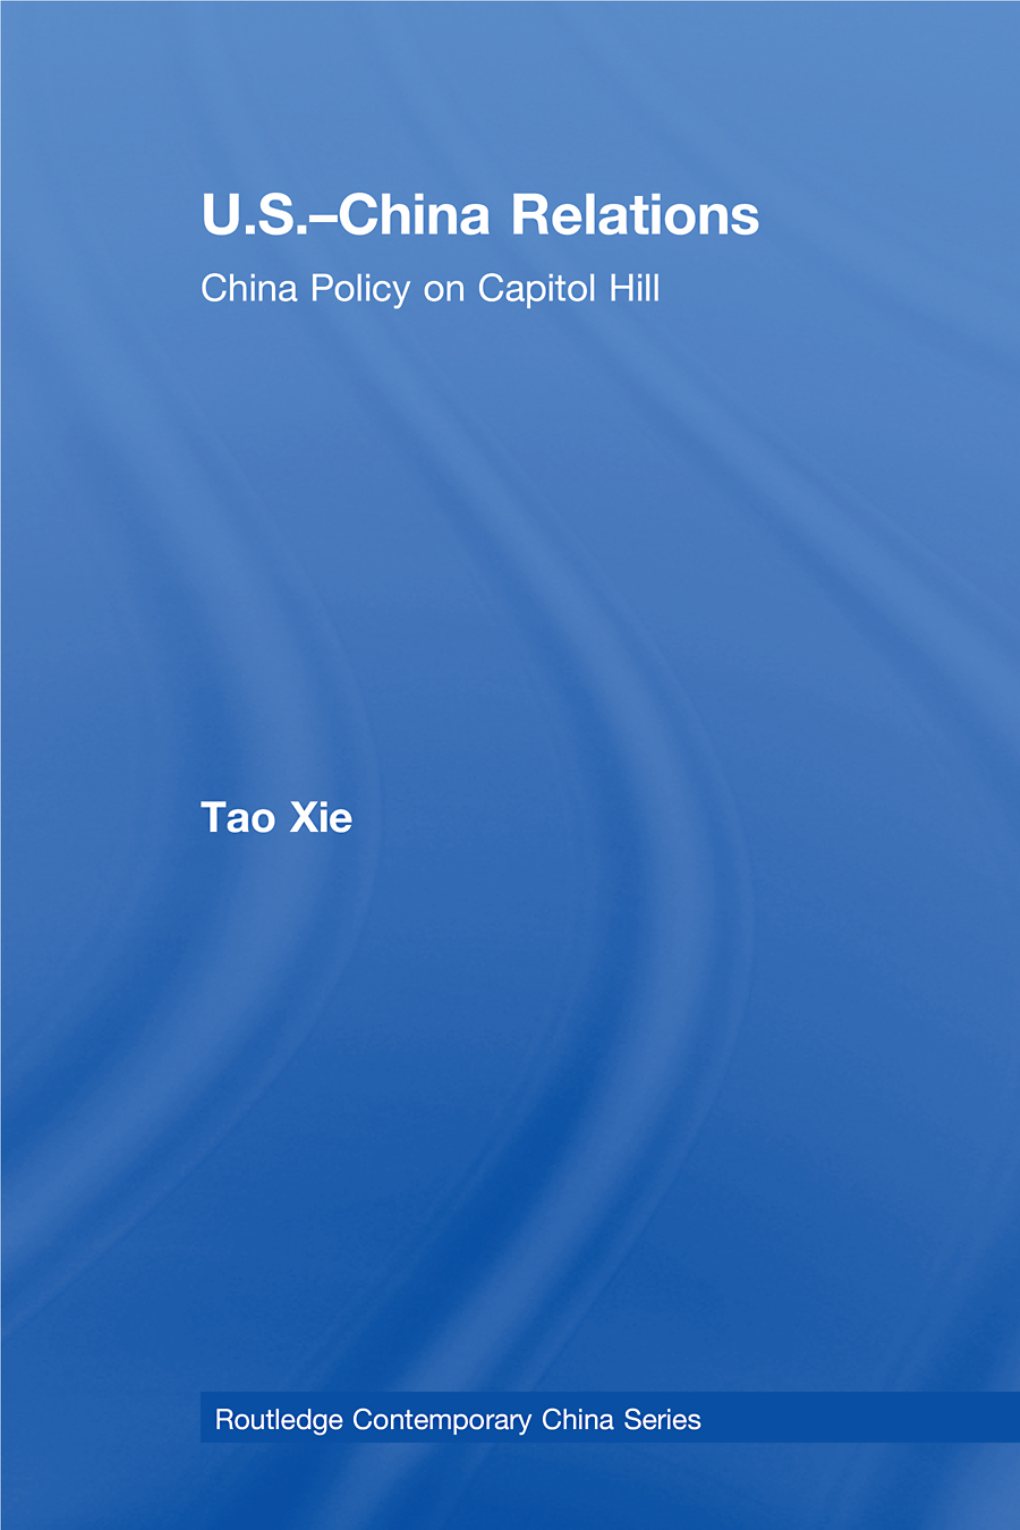 U.S.– China Relations: China Policy on Capitol Hill